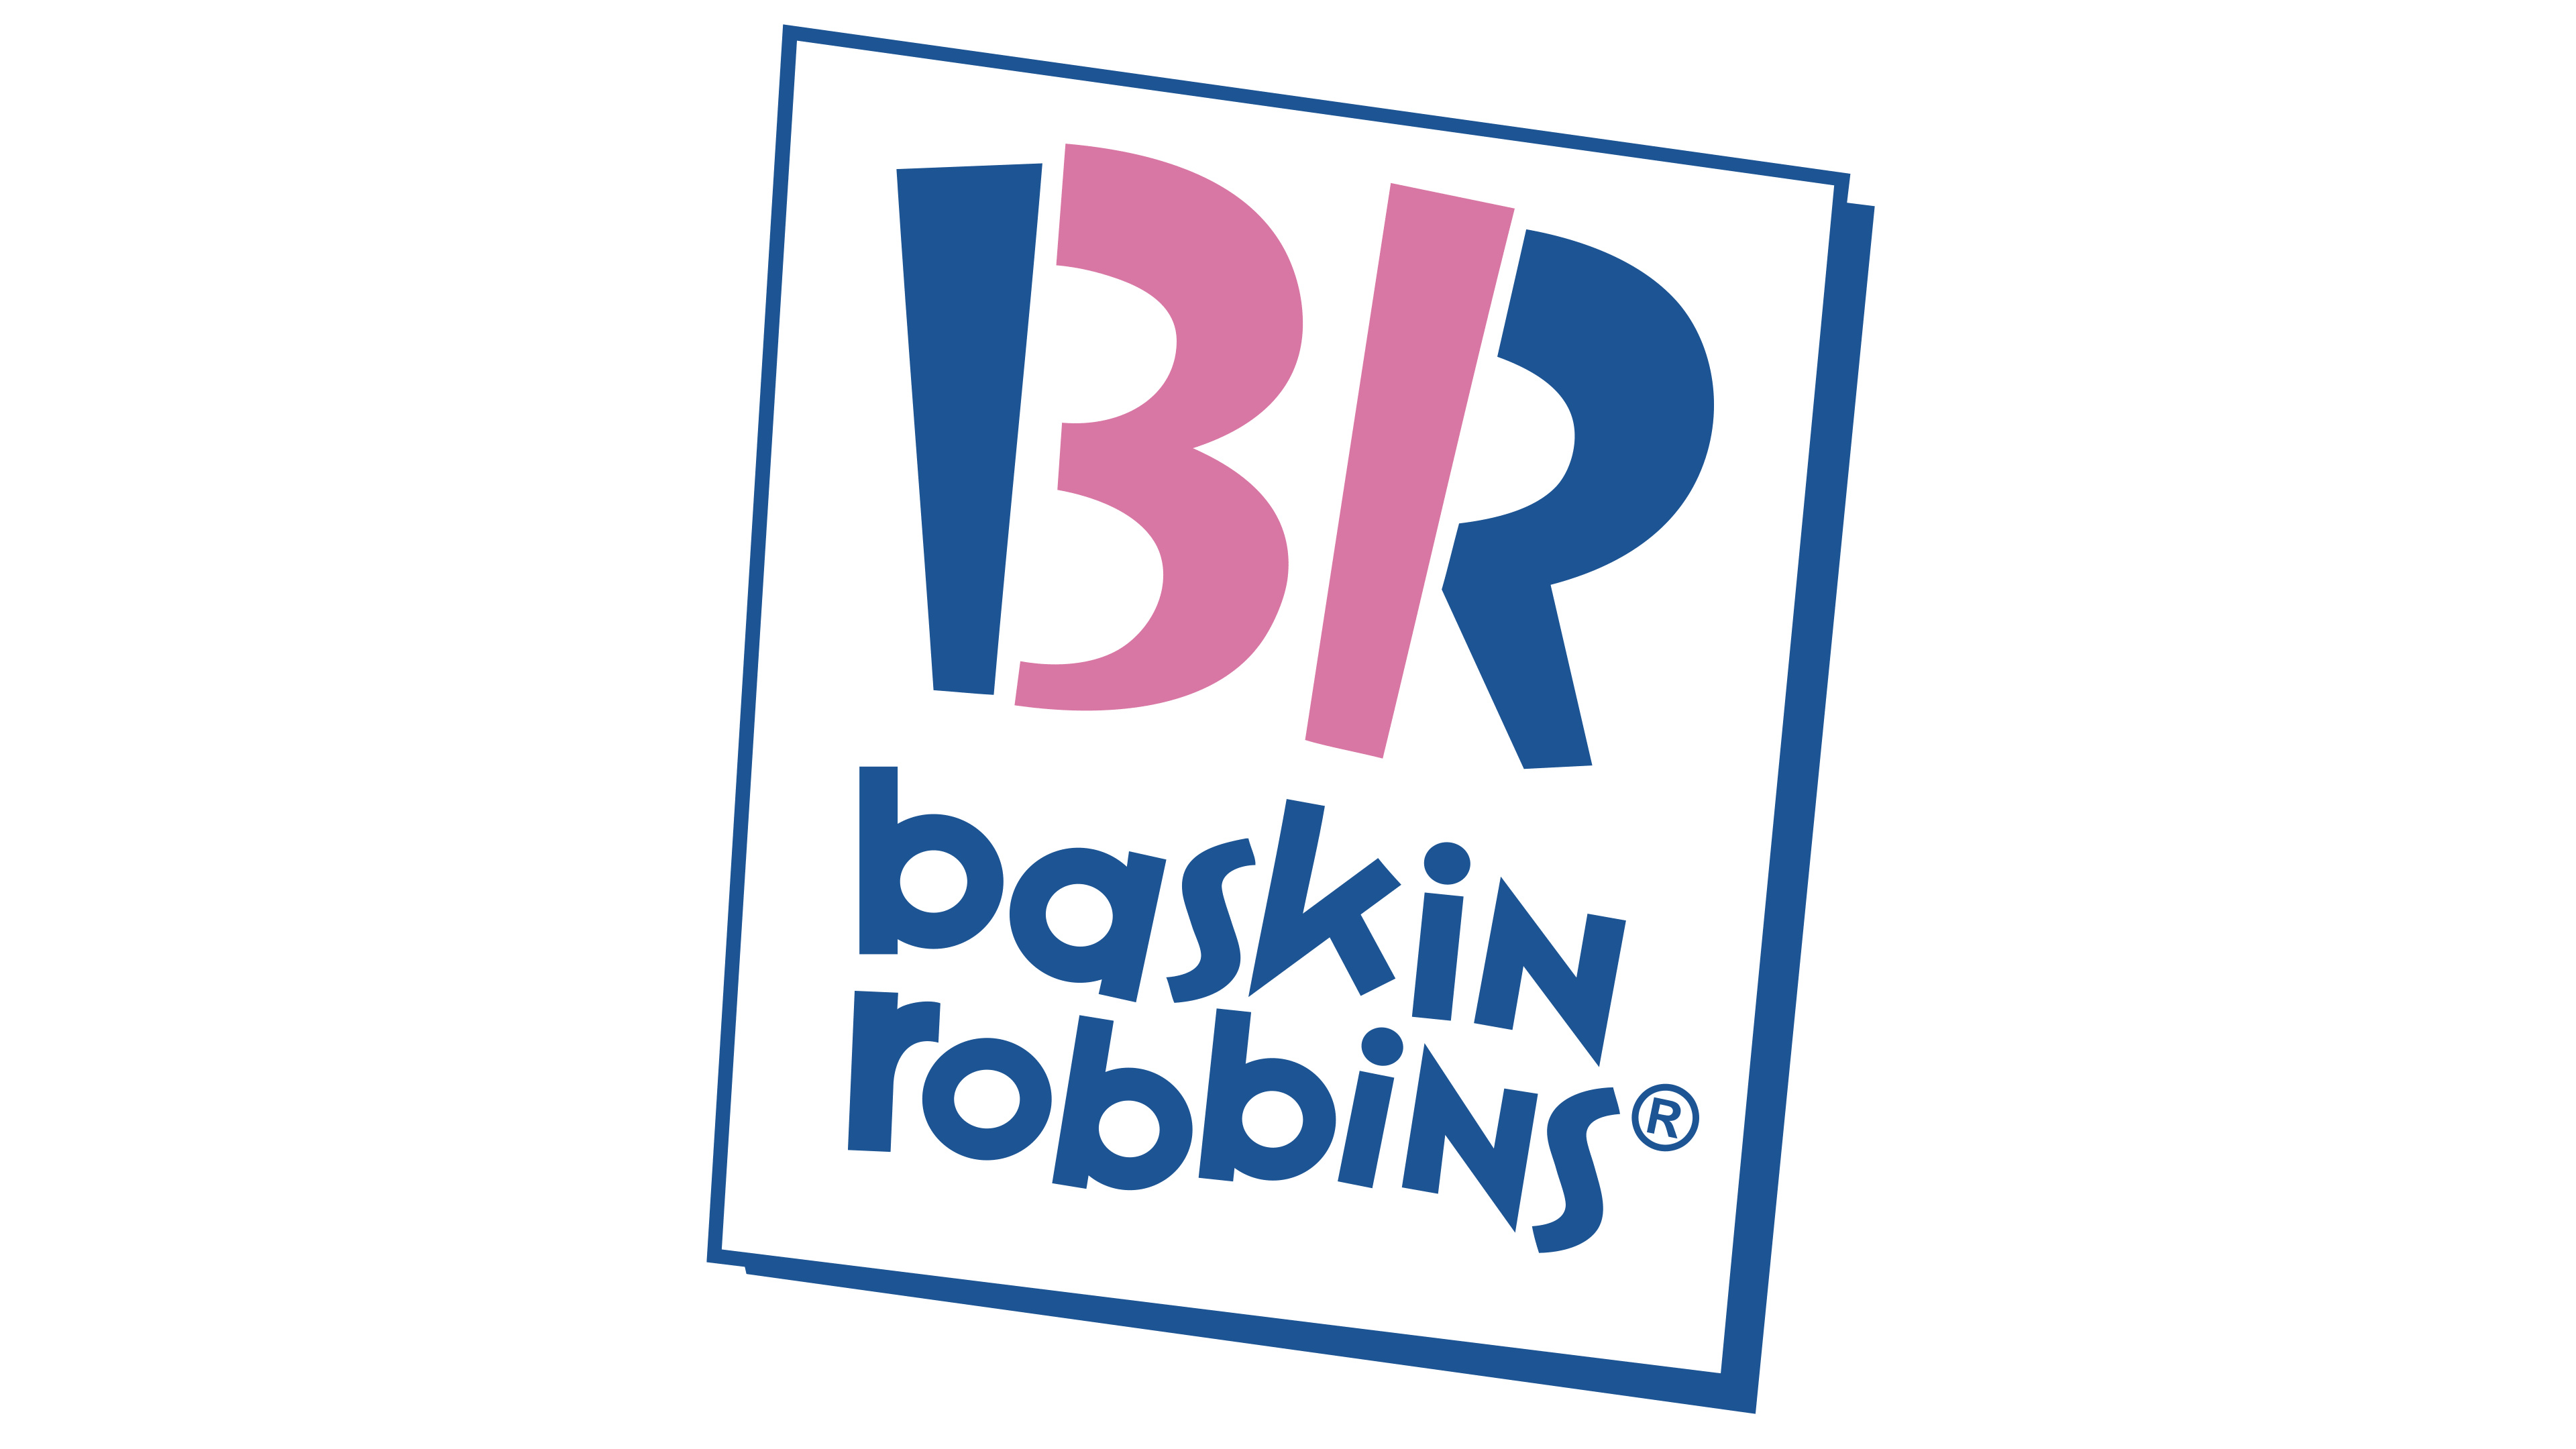 Baskin Robbins: The world's largest chain of ice-cream specialty shops, Hard scoop ice cream. 3840x2160 4K Background.